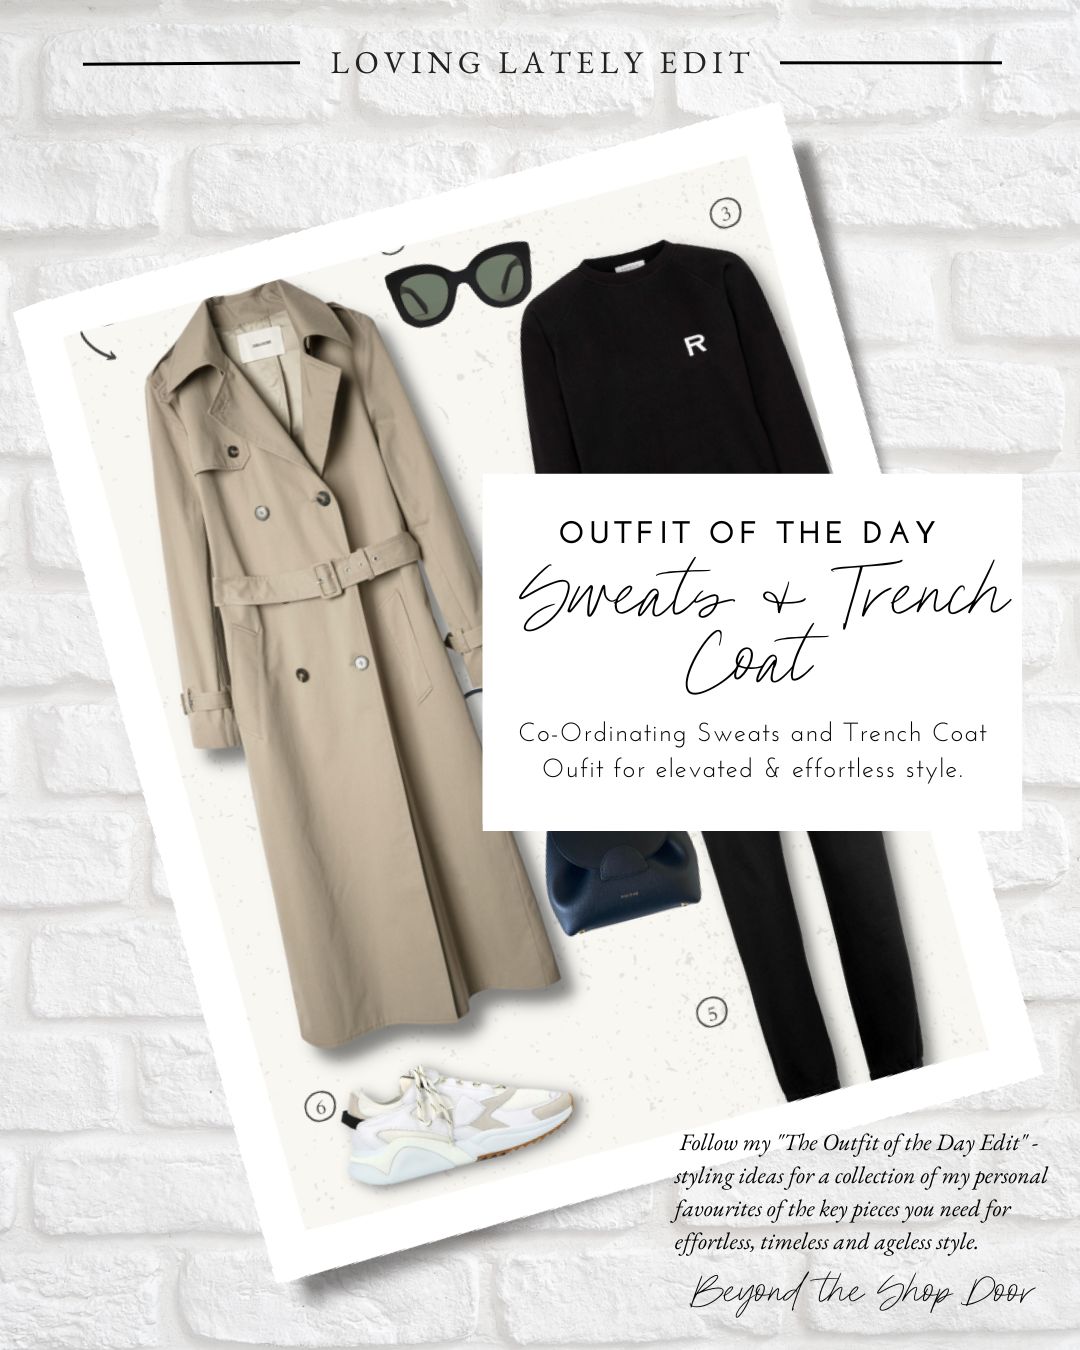 Effortlessly Stylish Trench Coat Outfit with Coordinating Sweats